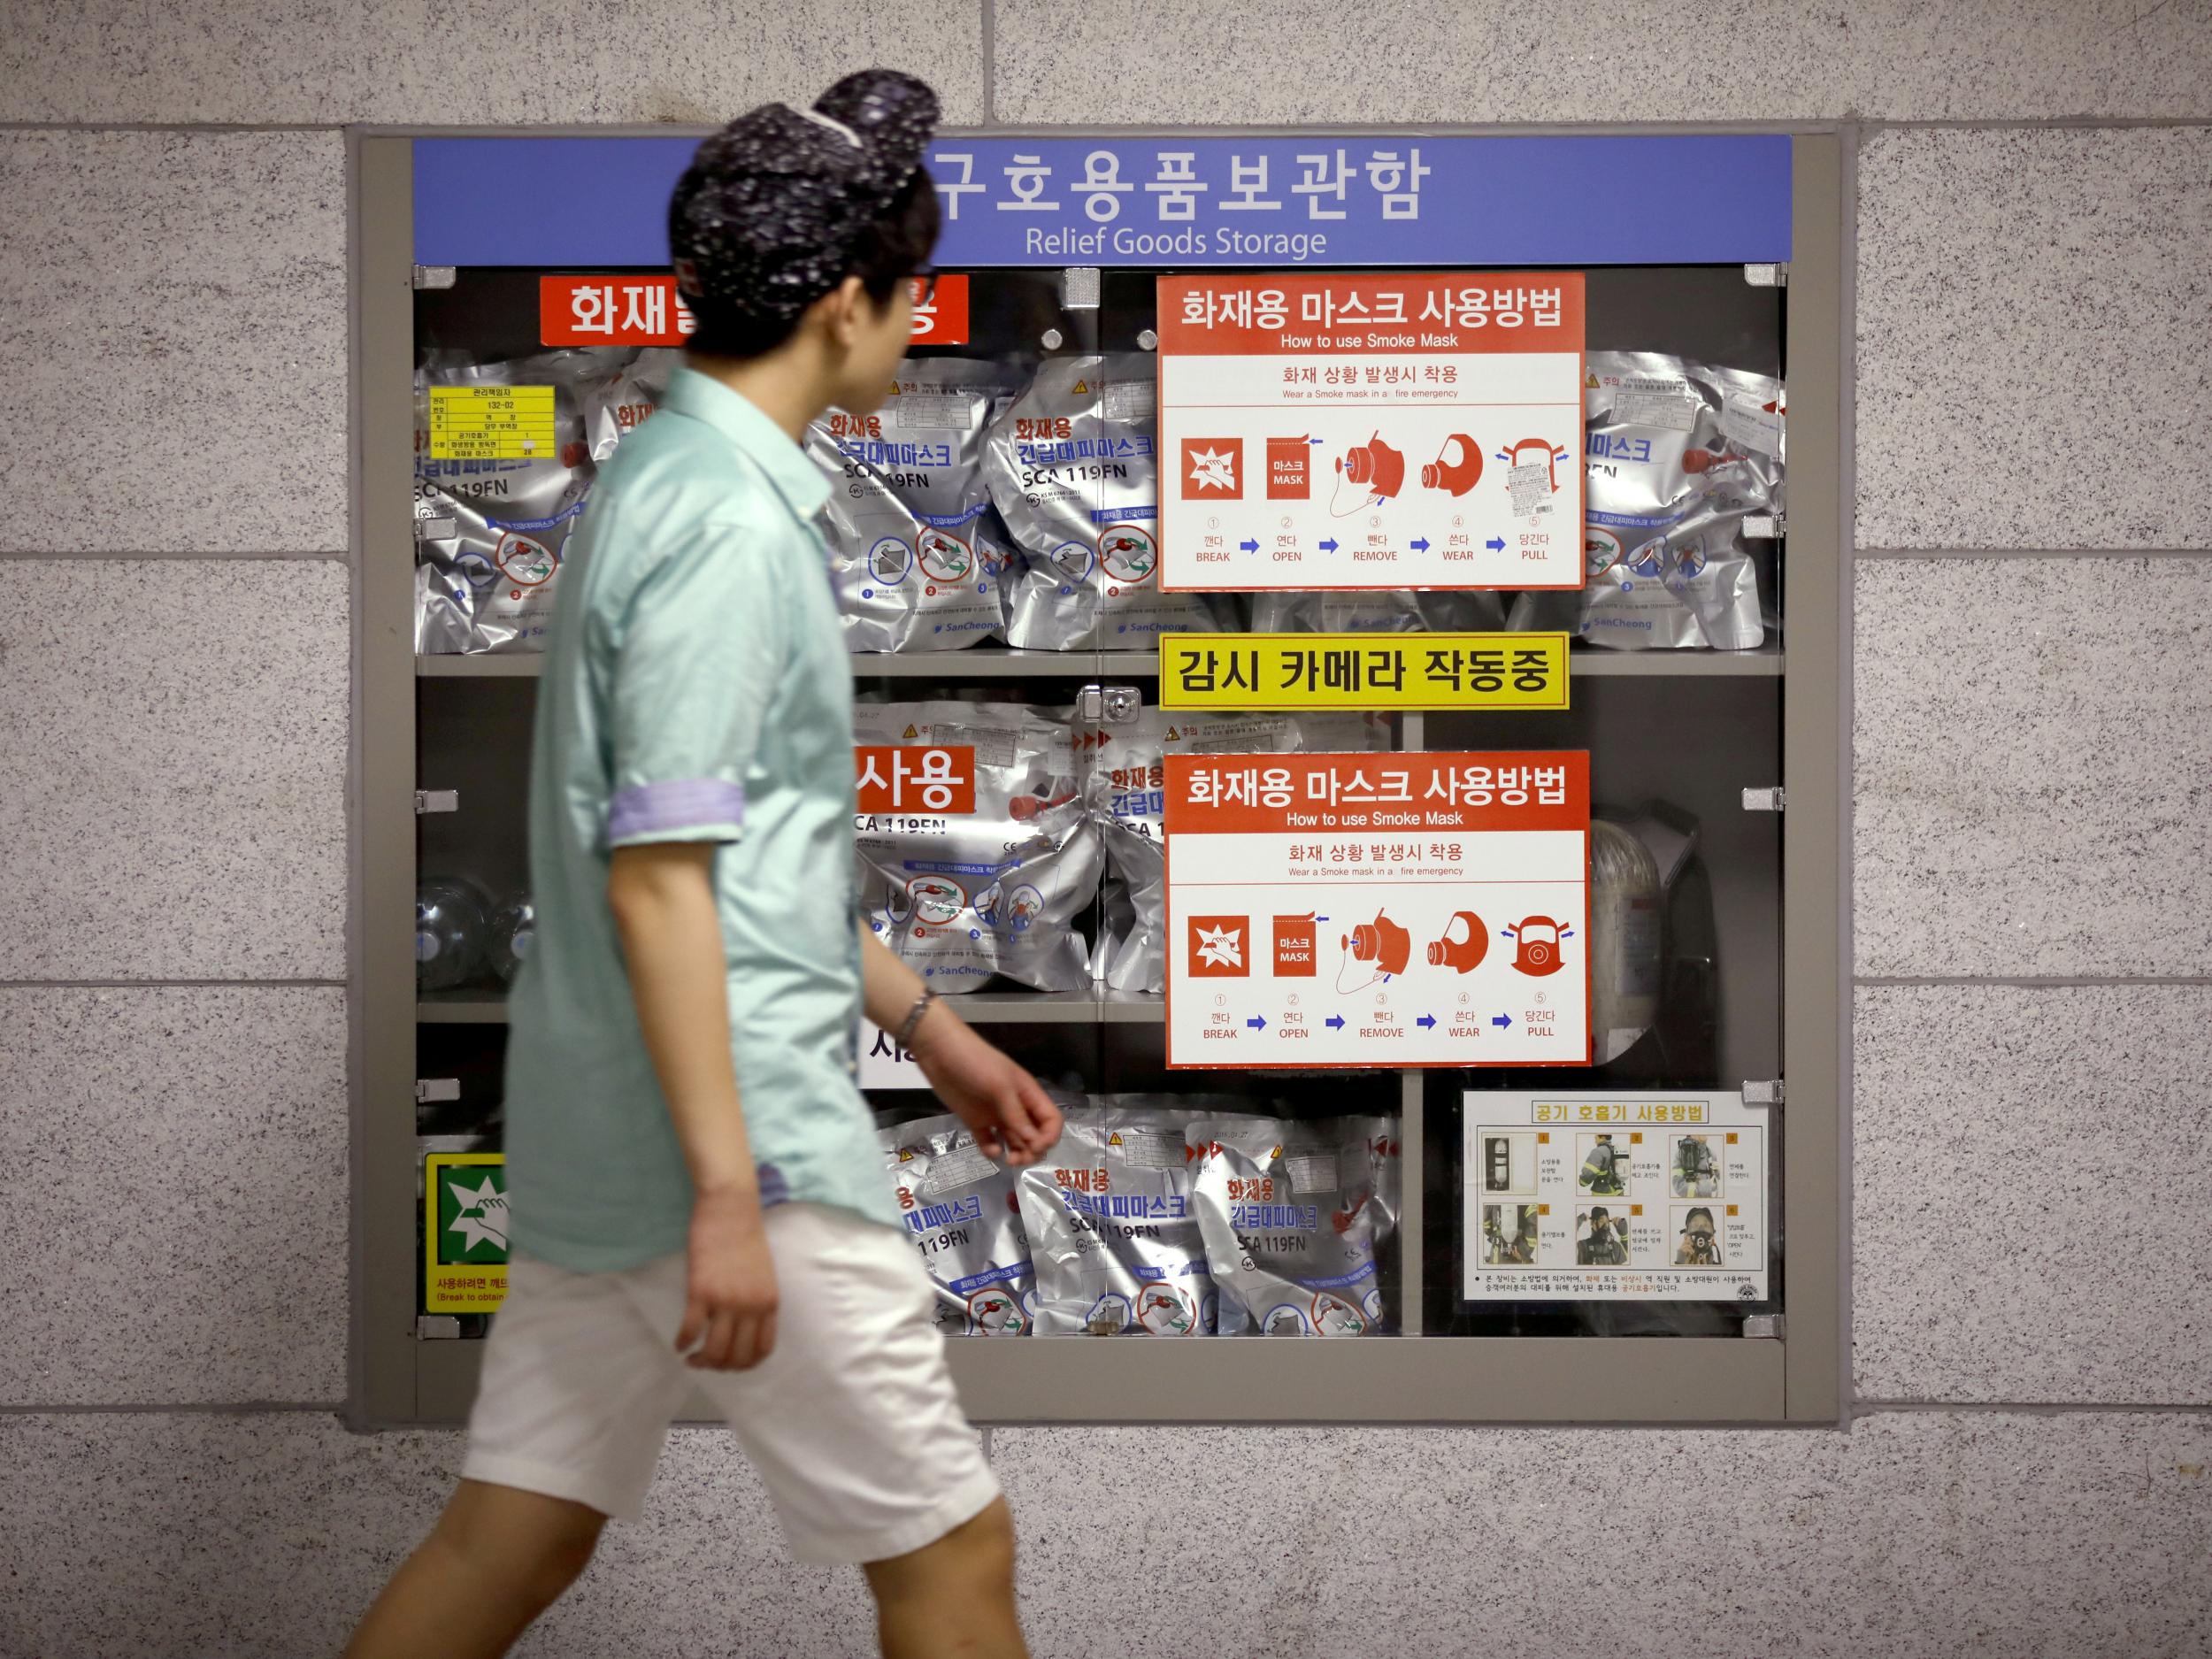 A relief goods storage inside a subway station which is used as a shelter for emergency situation in Seoul, South Korea